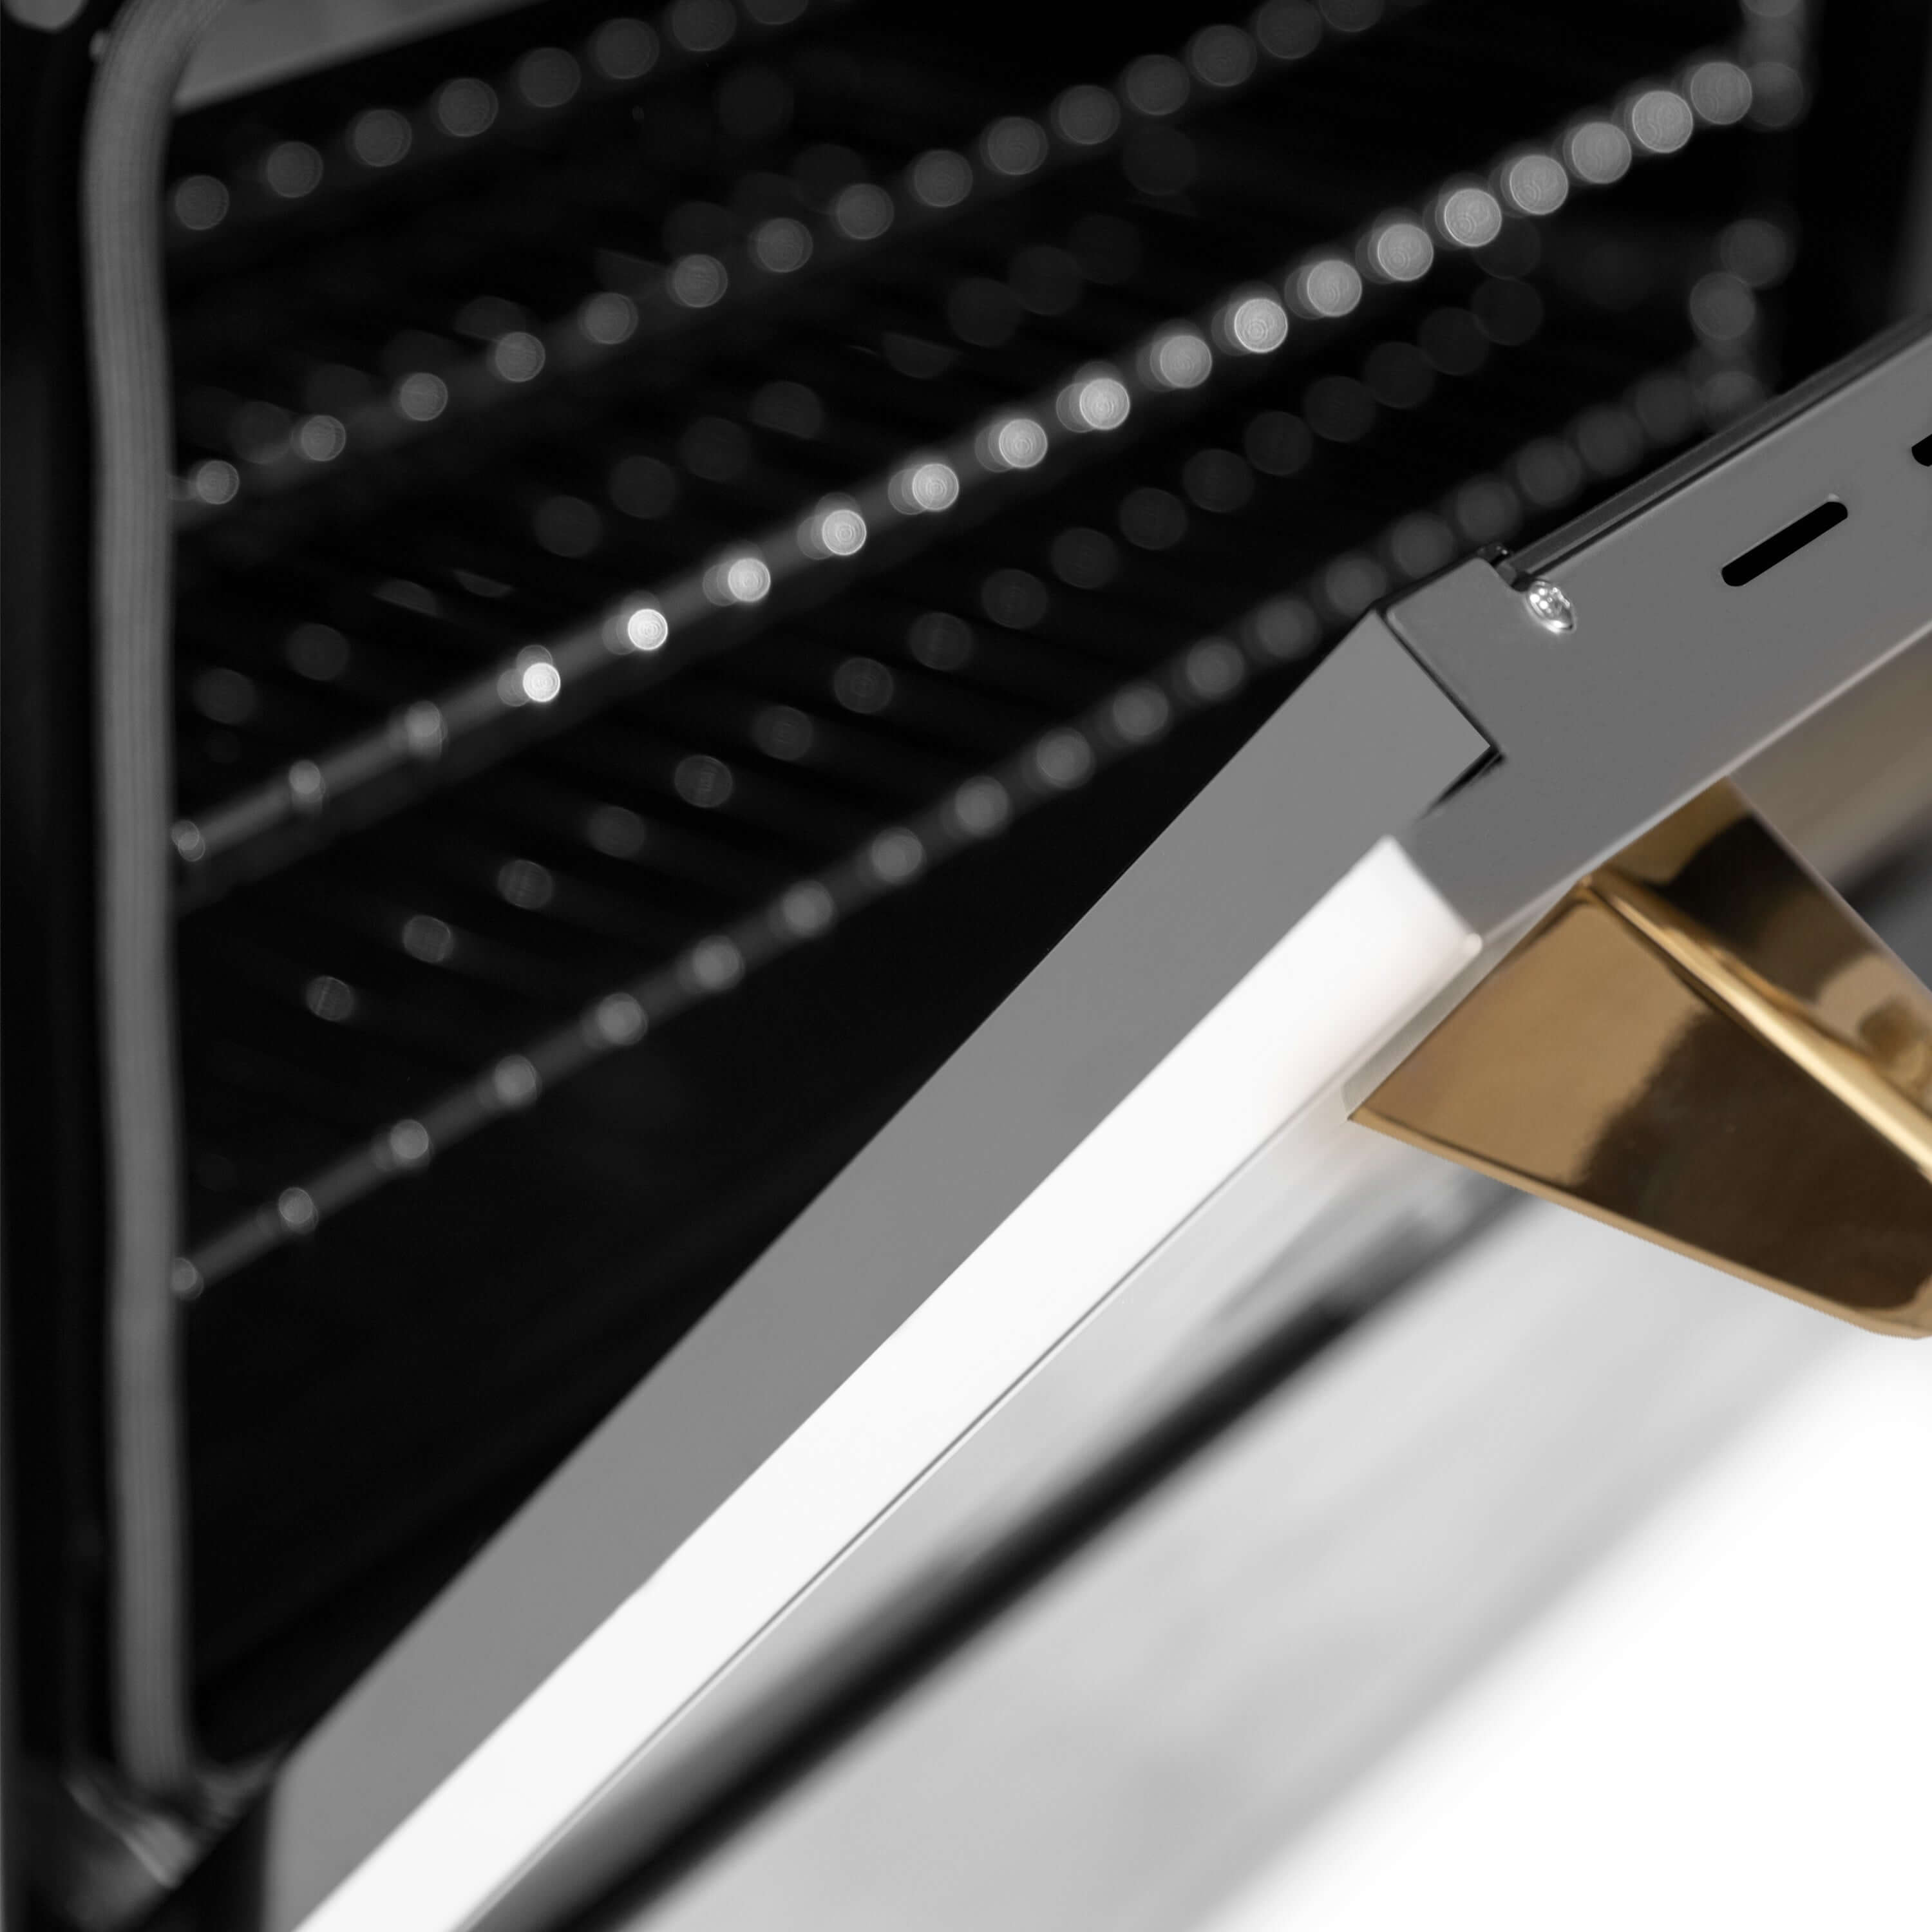 ZLINE's proprietary stay-put hinges are designed to support the full weight of the oven door and hold at any place.